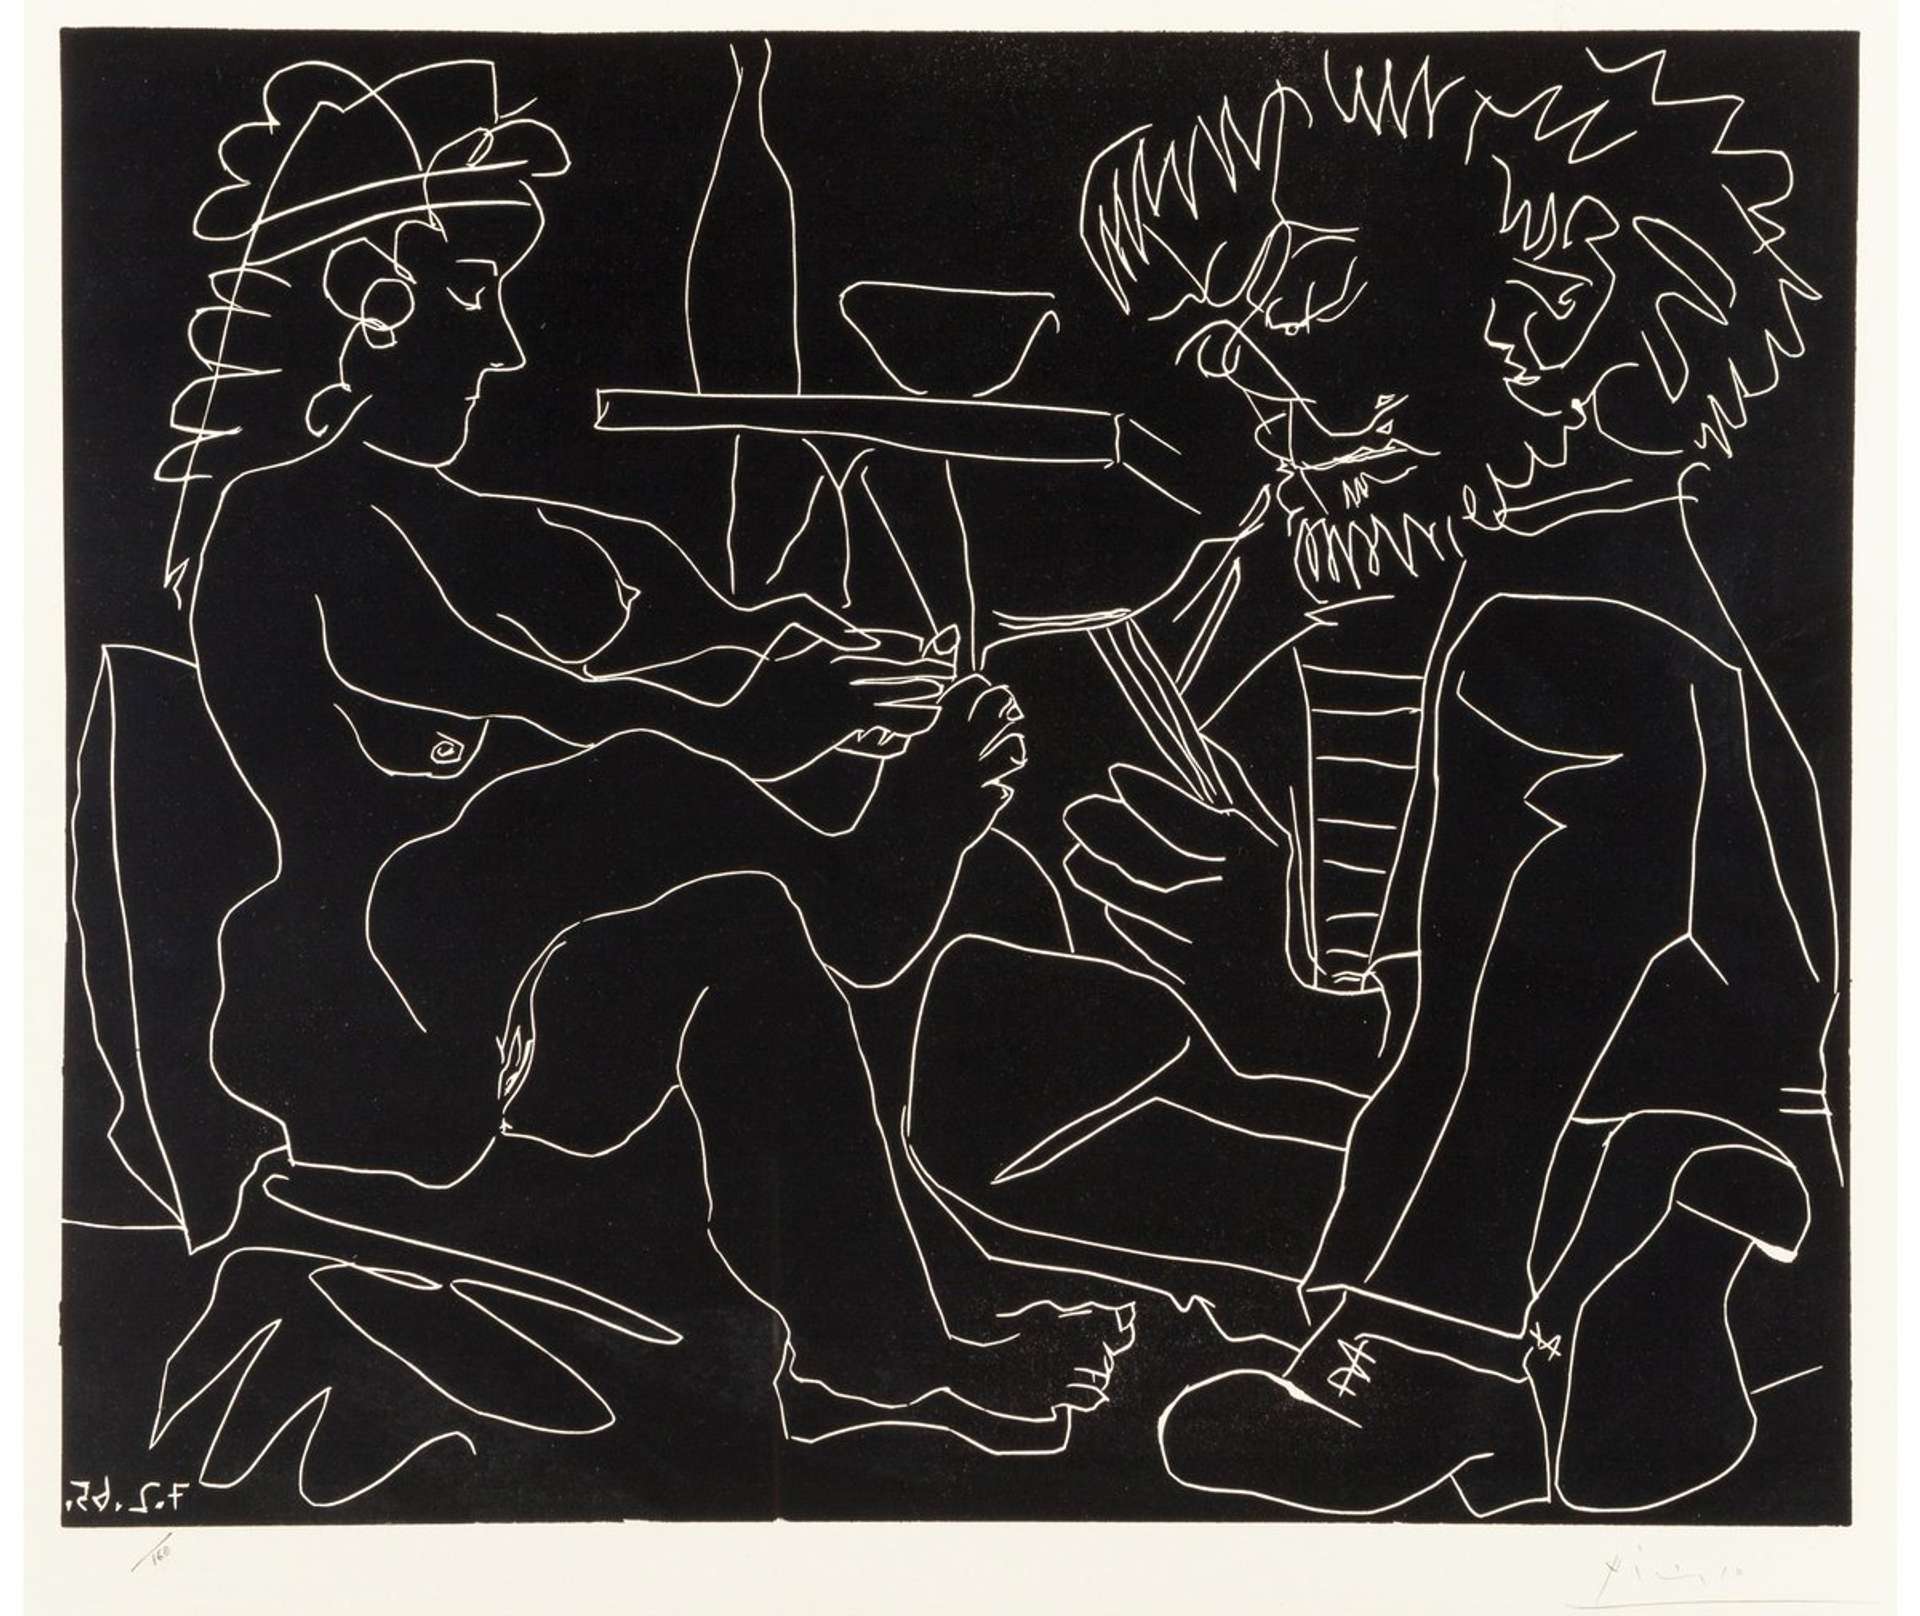 An image of the print Le Peintre Et Son Modèle by Pablo Picasso. It is a white line drawing done against a black background, and shows a nude female sat across from a man sketching.